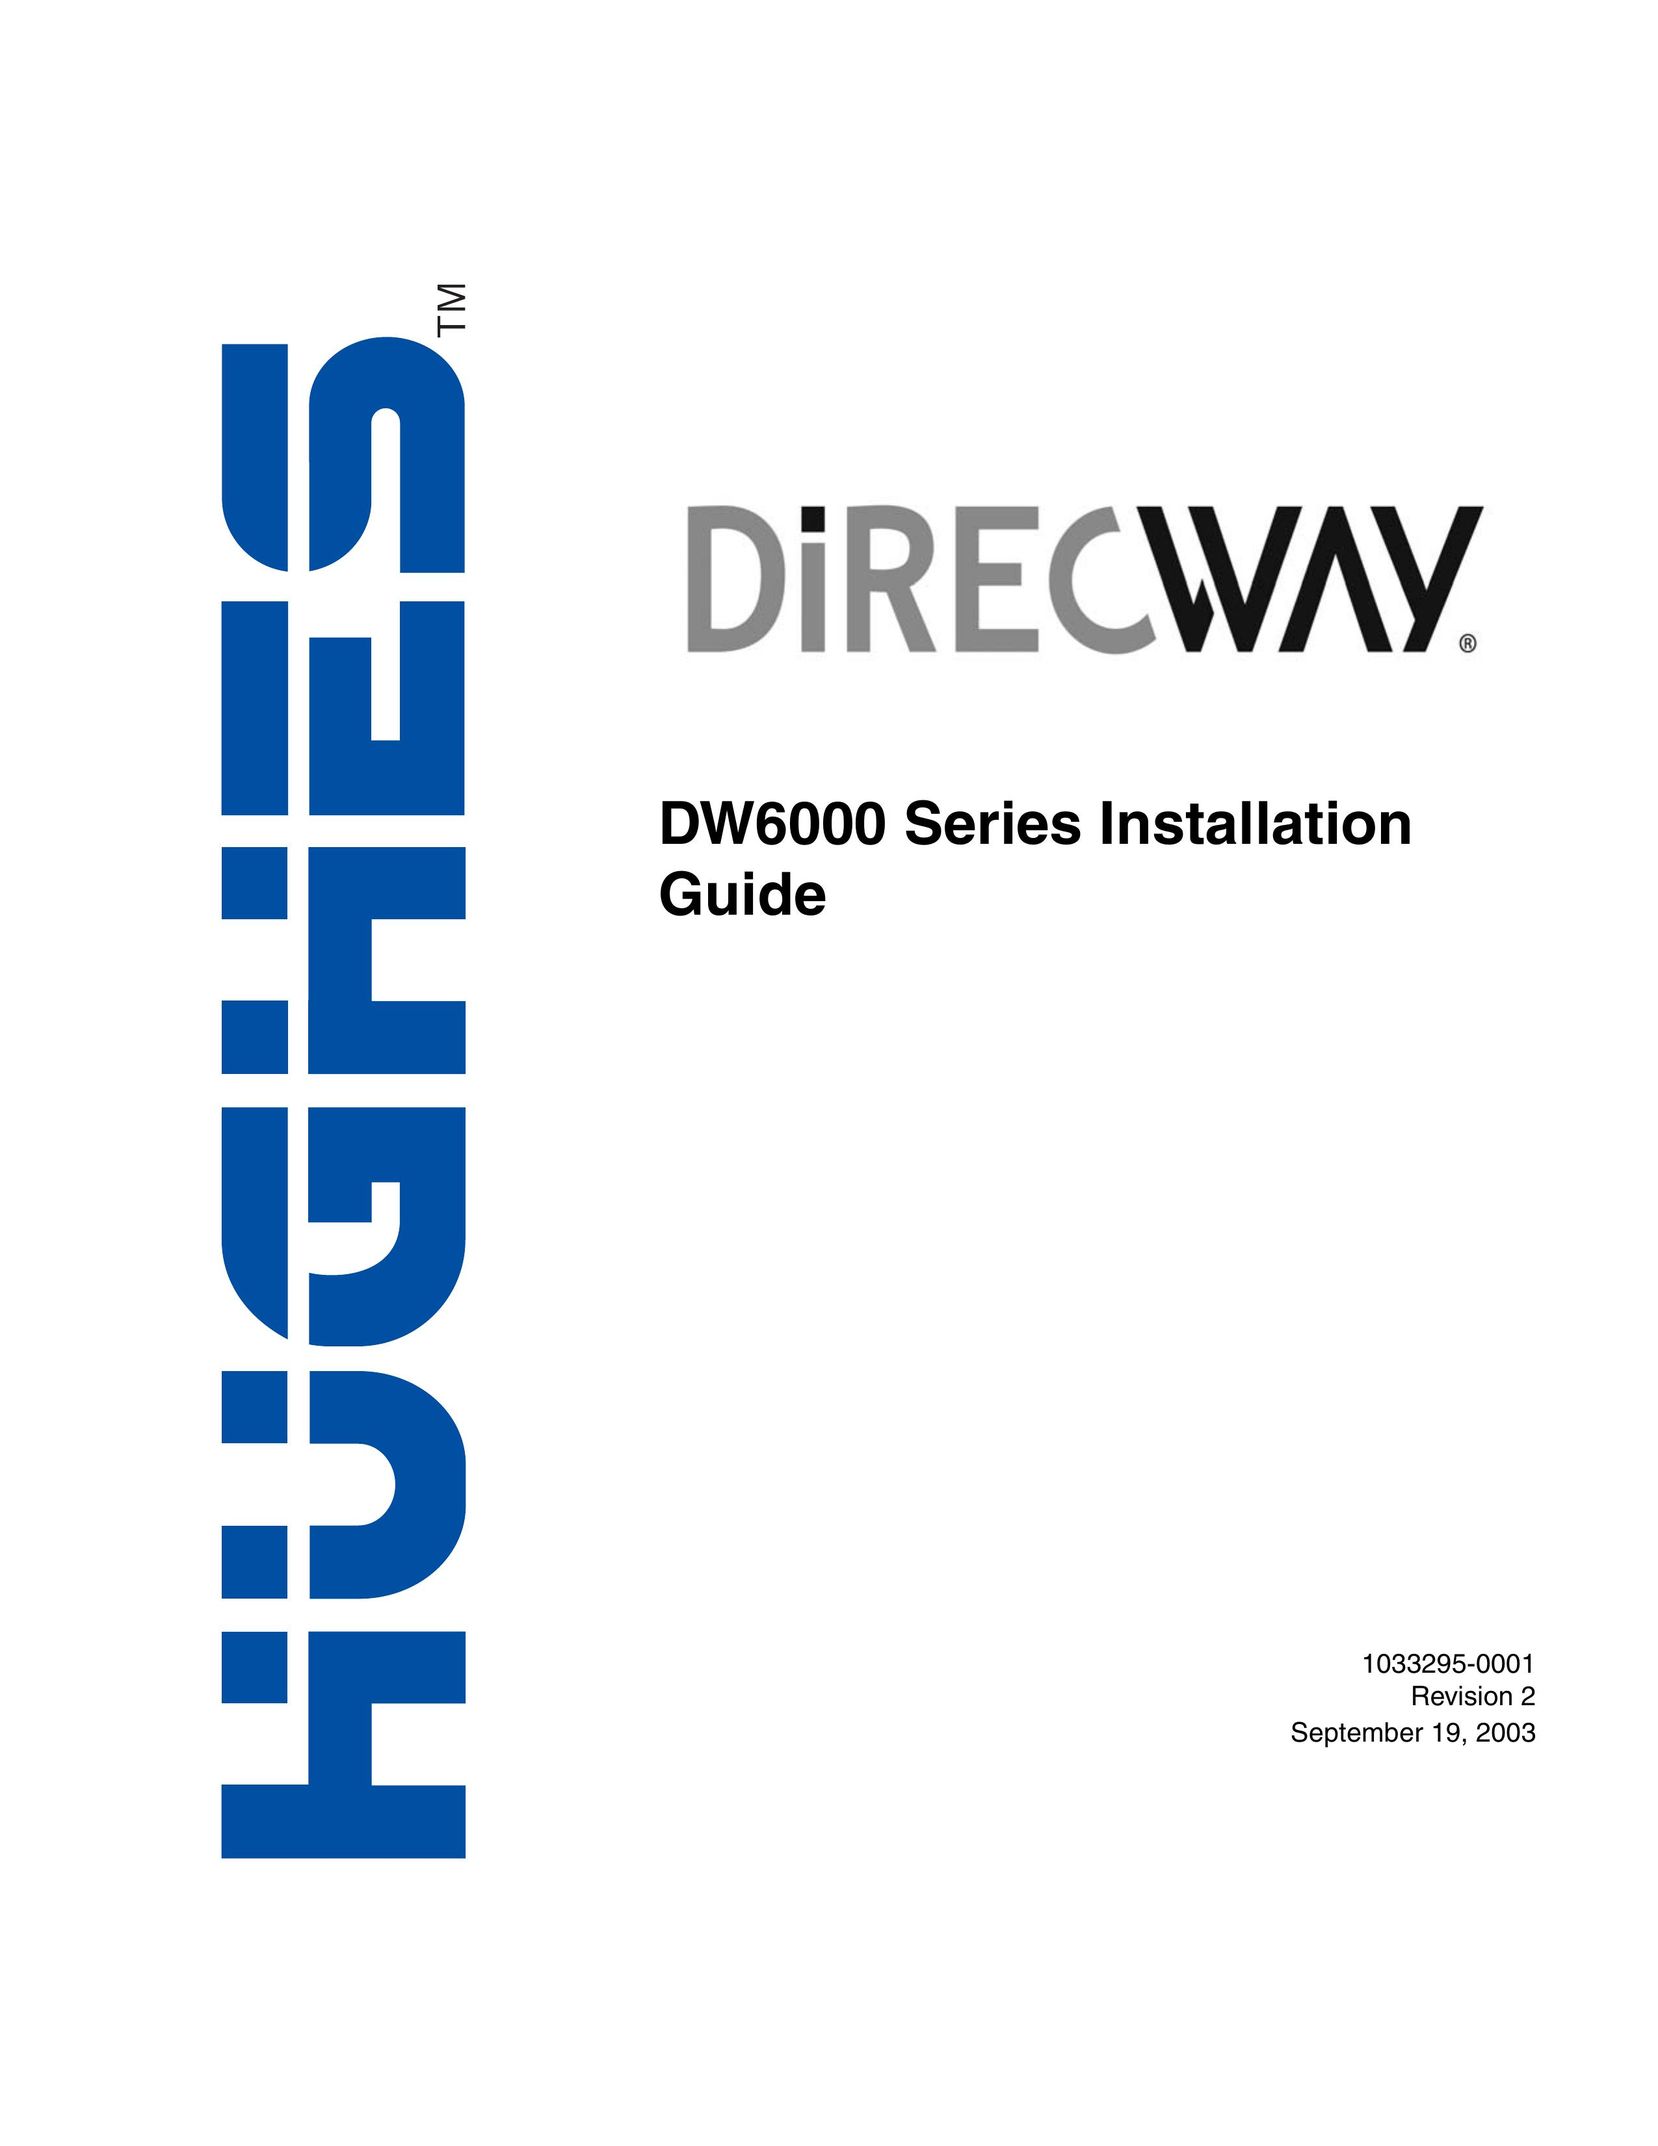 Hughes DW6000 Network Router User Manual